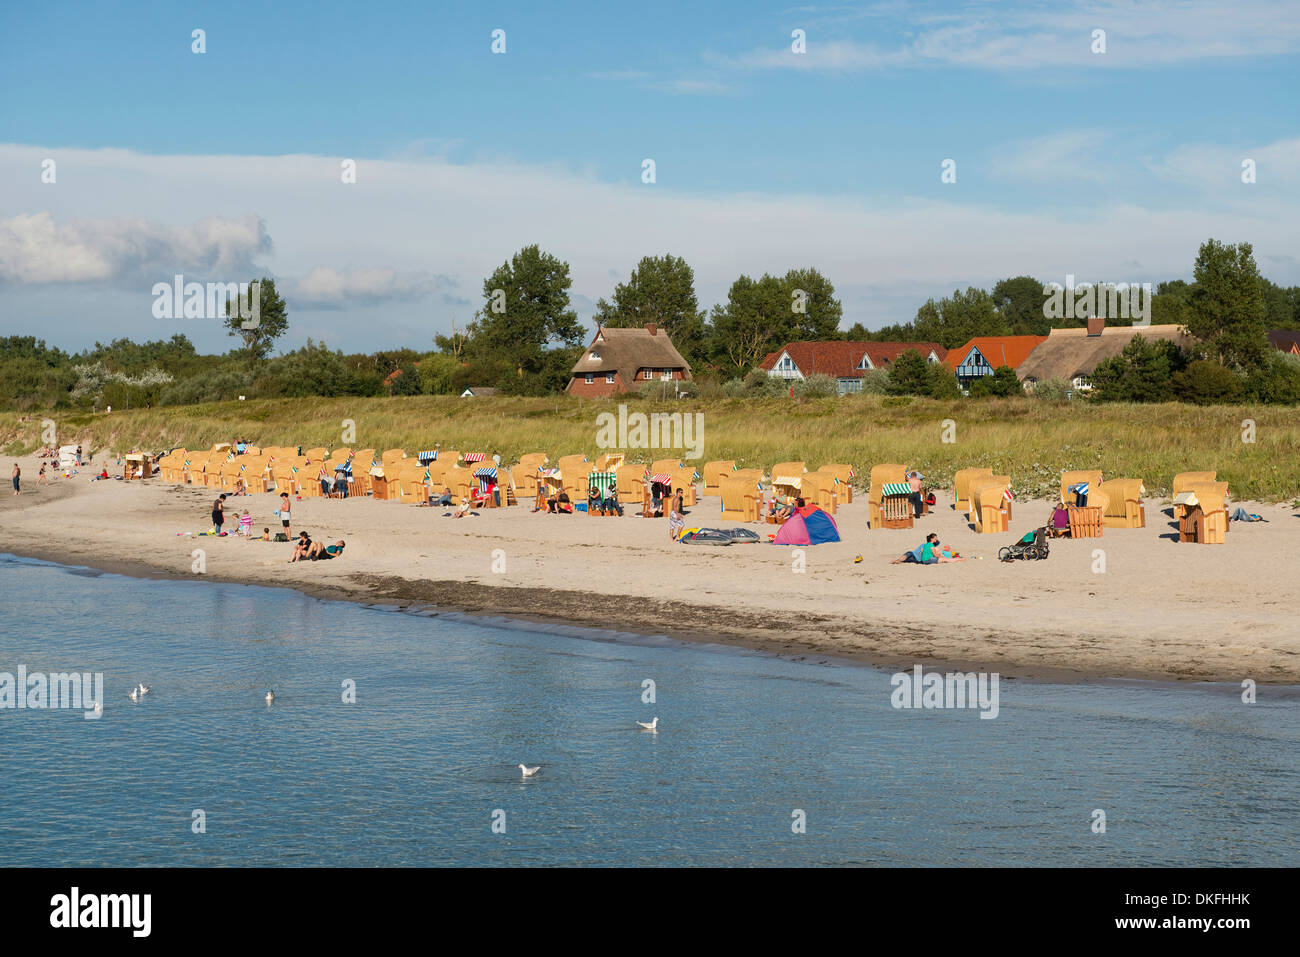 Baltic Sea and beach, Wustrow resort, Mecklenburg-Vorpommern, Germany Stock Photo